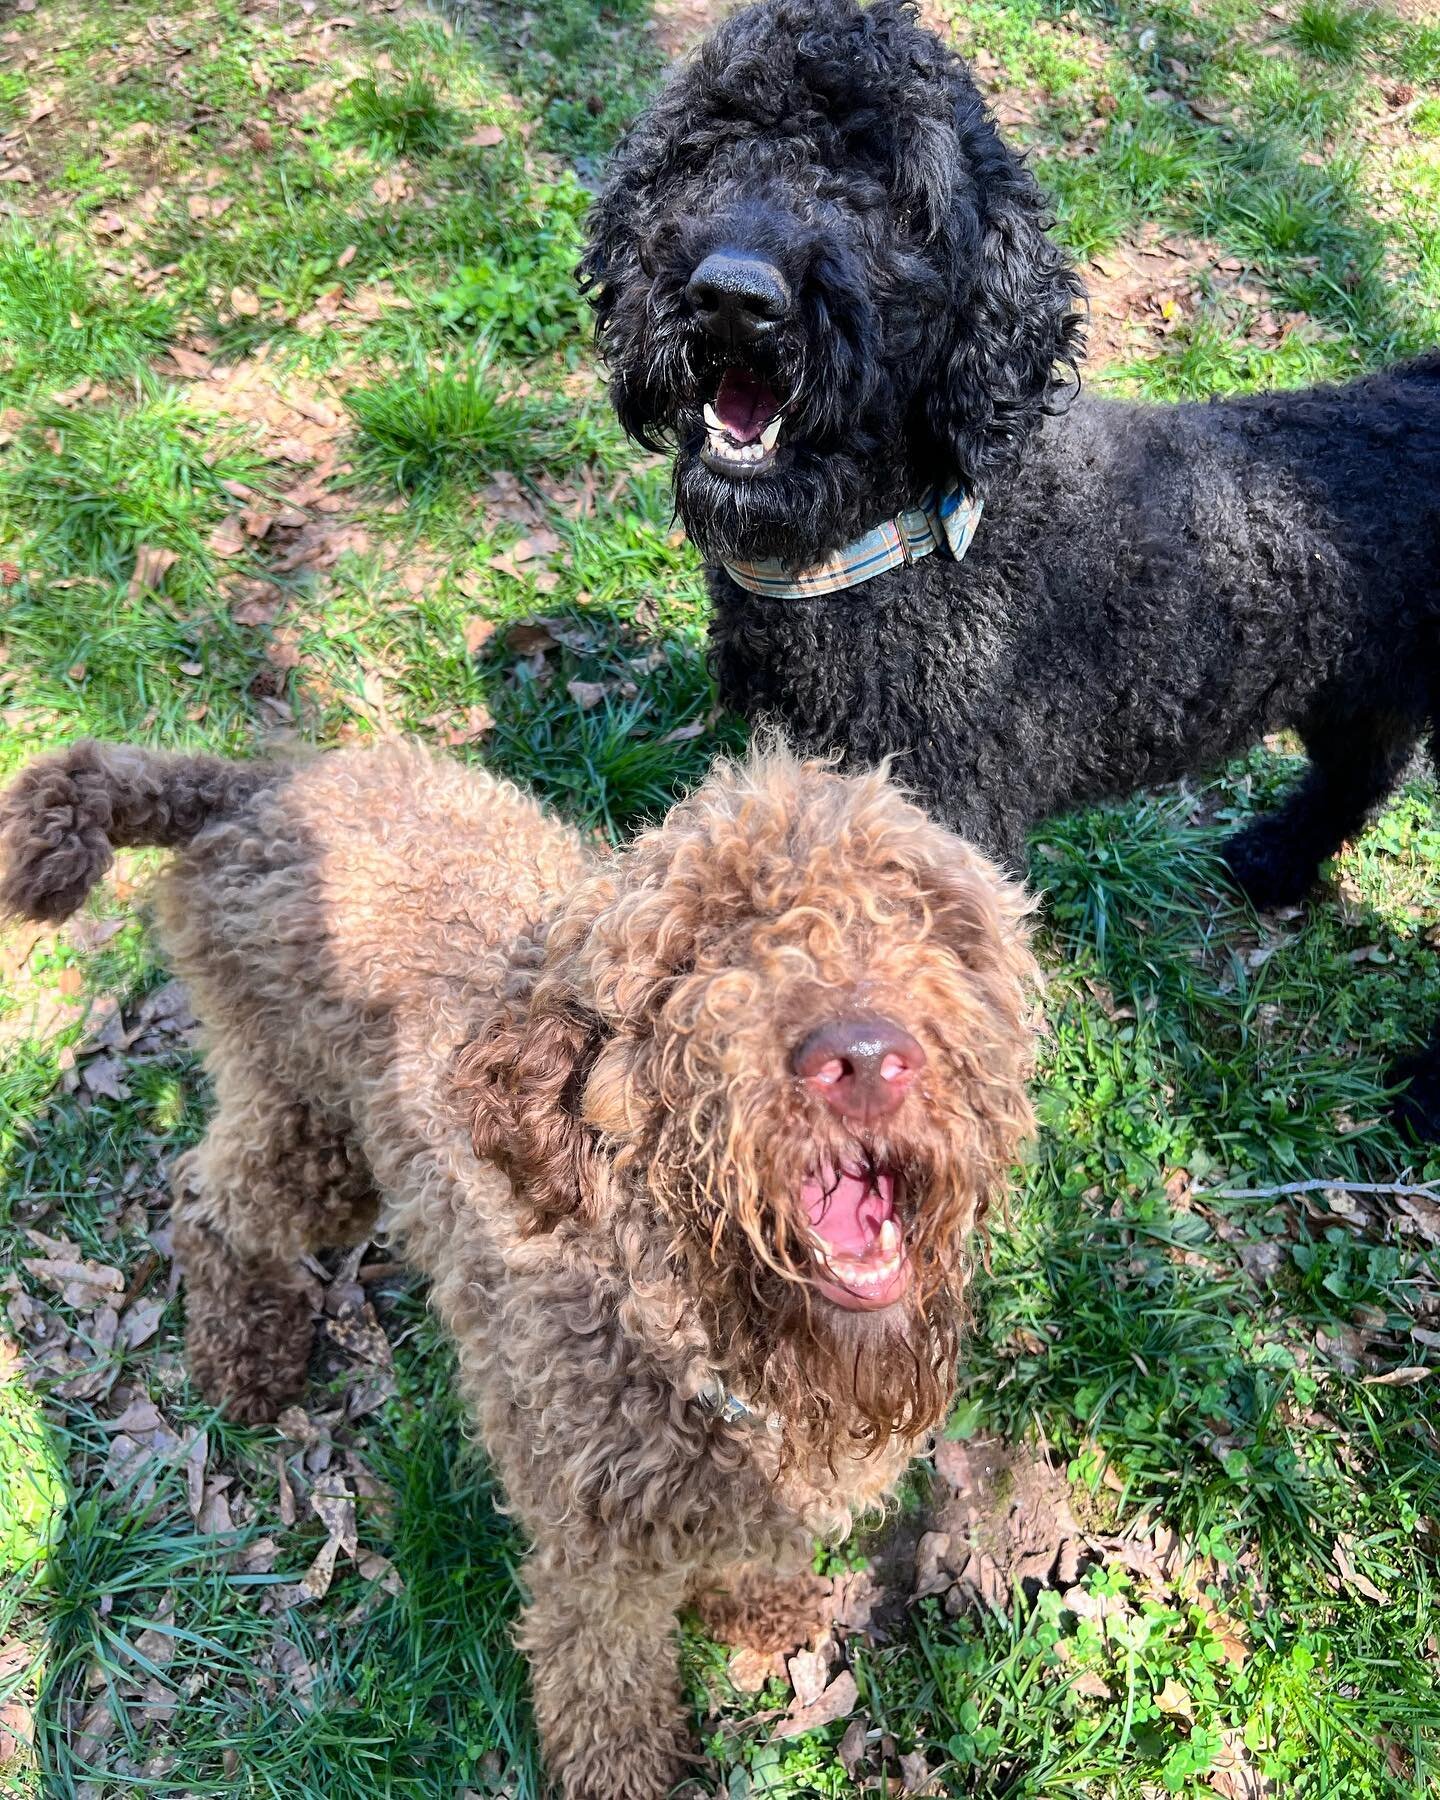 Everybody welcome Figment and Lewy! They&rsquo;re both standard poodles who came to stay with me for boarding last week. They are both extremely sweet and caught on to our routine quickly, but have some things they need to work through so Figment wil